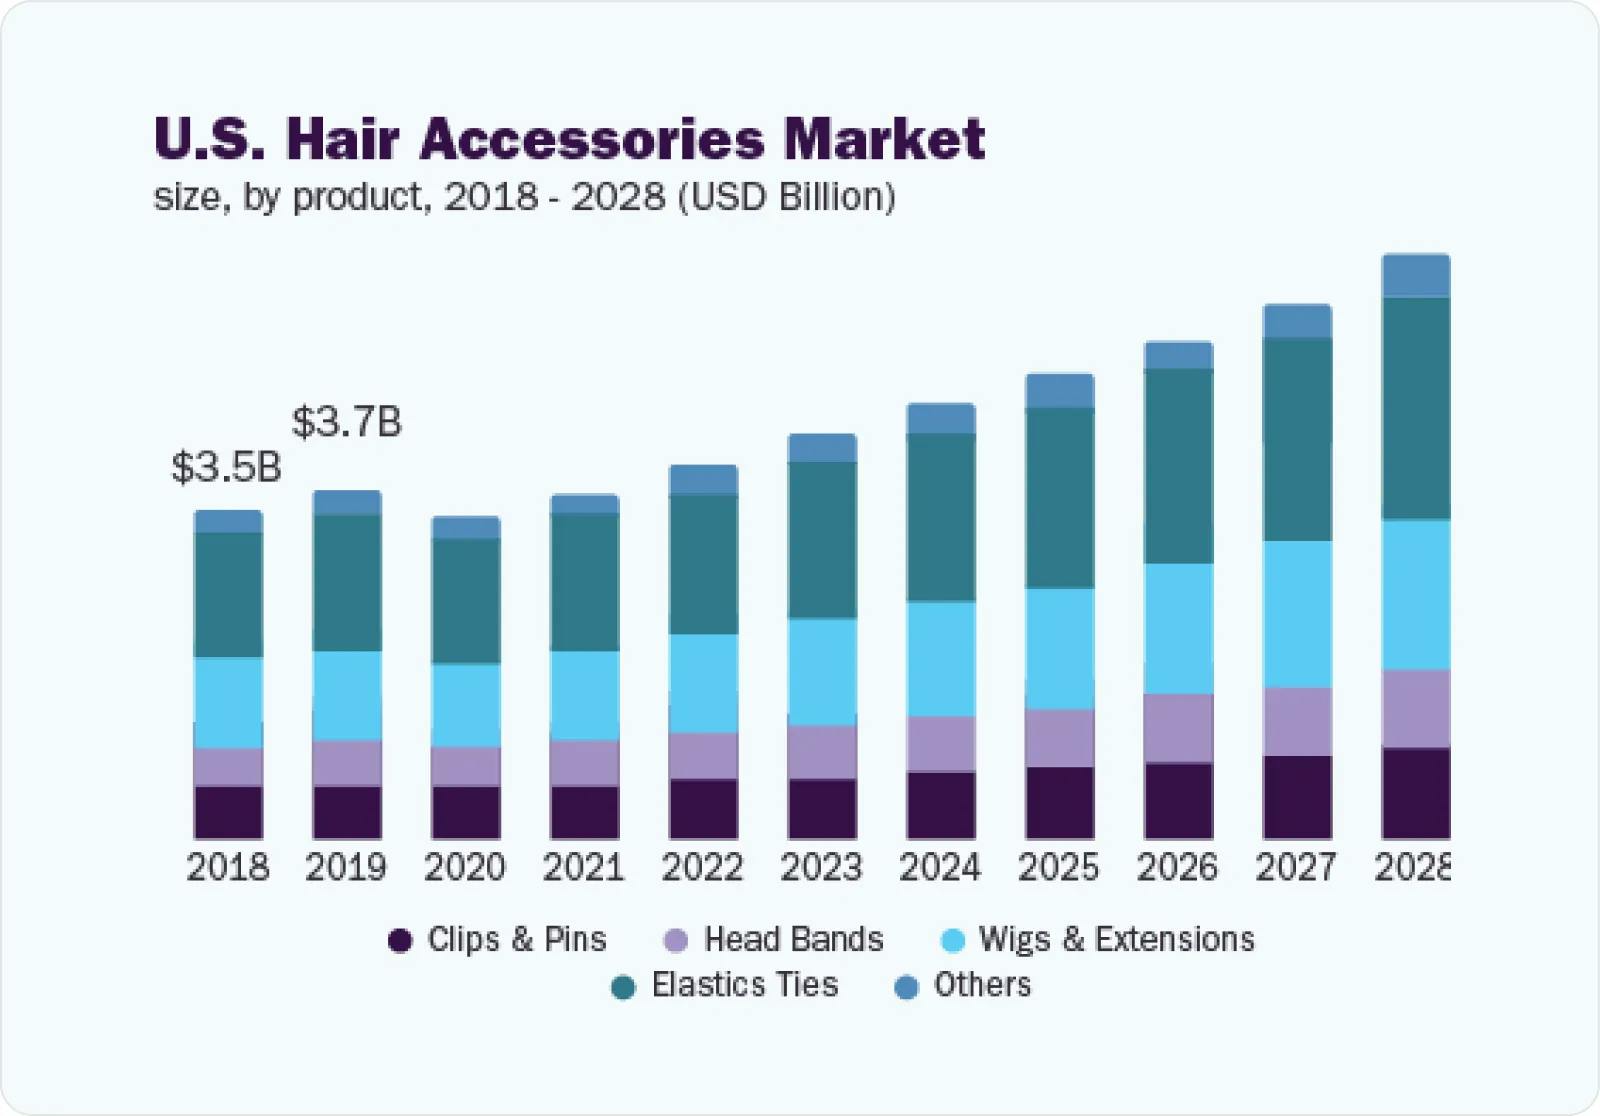 US hair accessories market size/growth